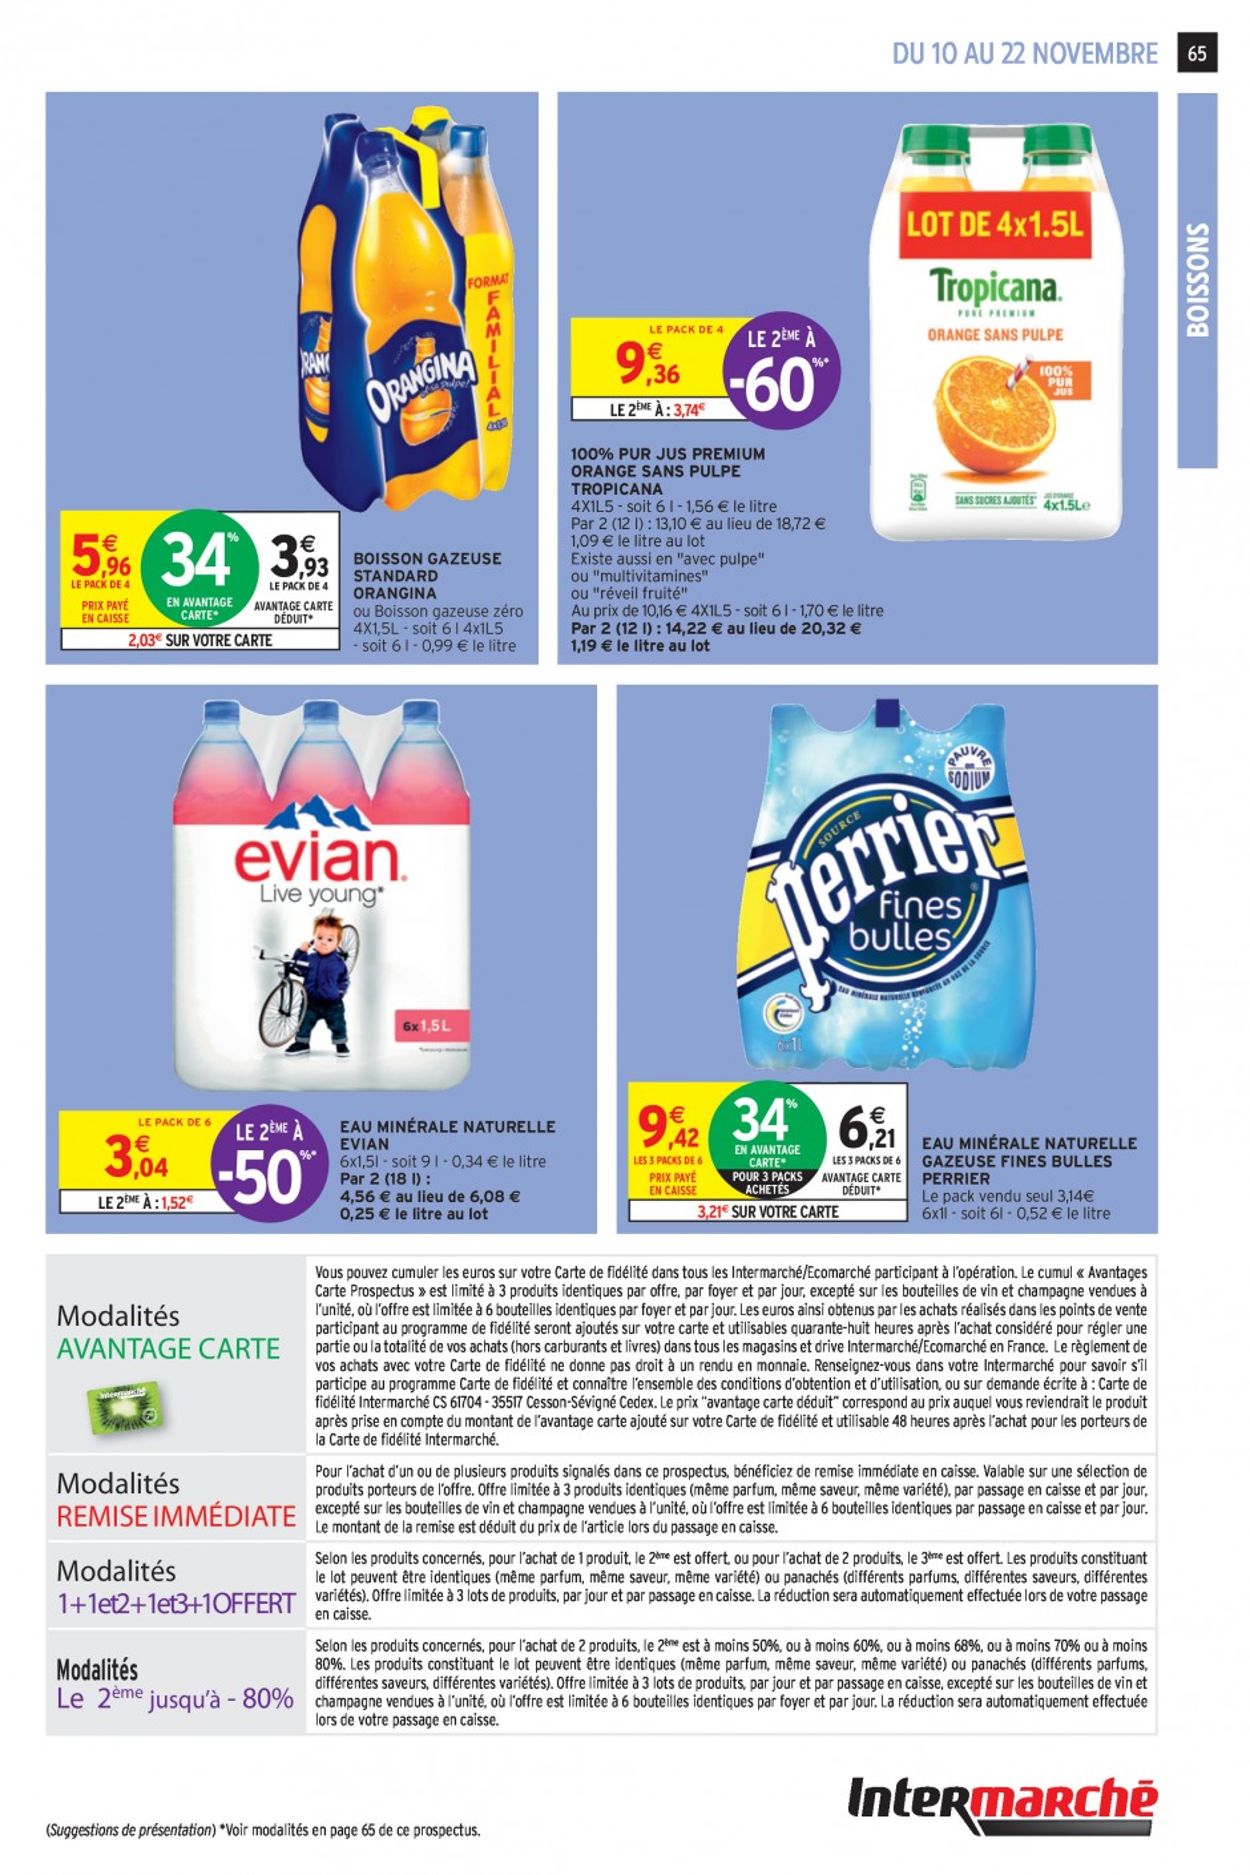 Intermarché Black Friday 2020 Catalogue - 10.11-22.11.2020 (Page 65)